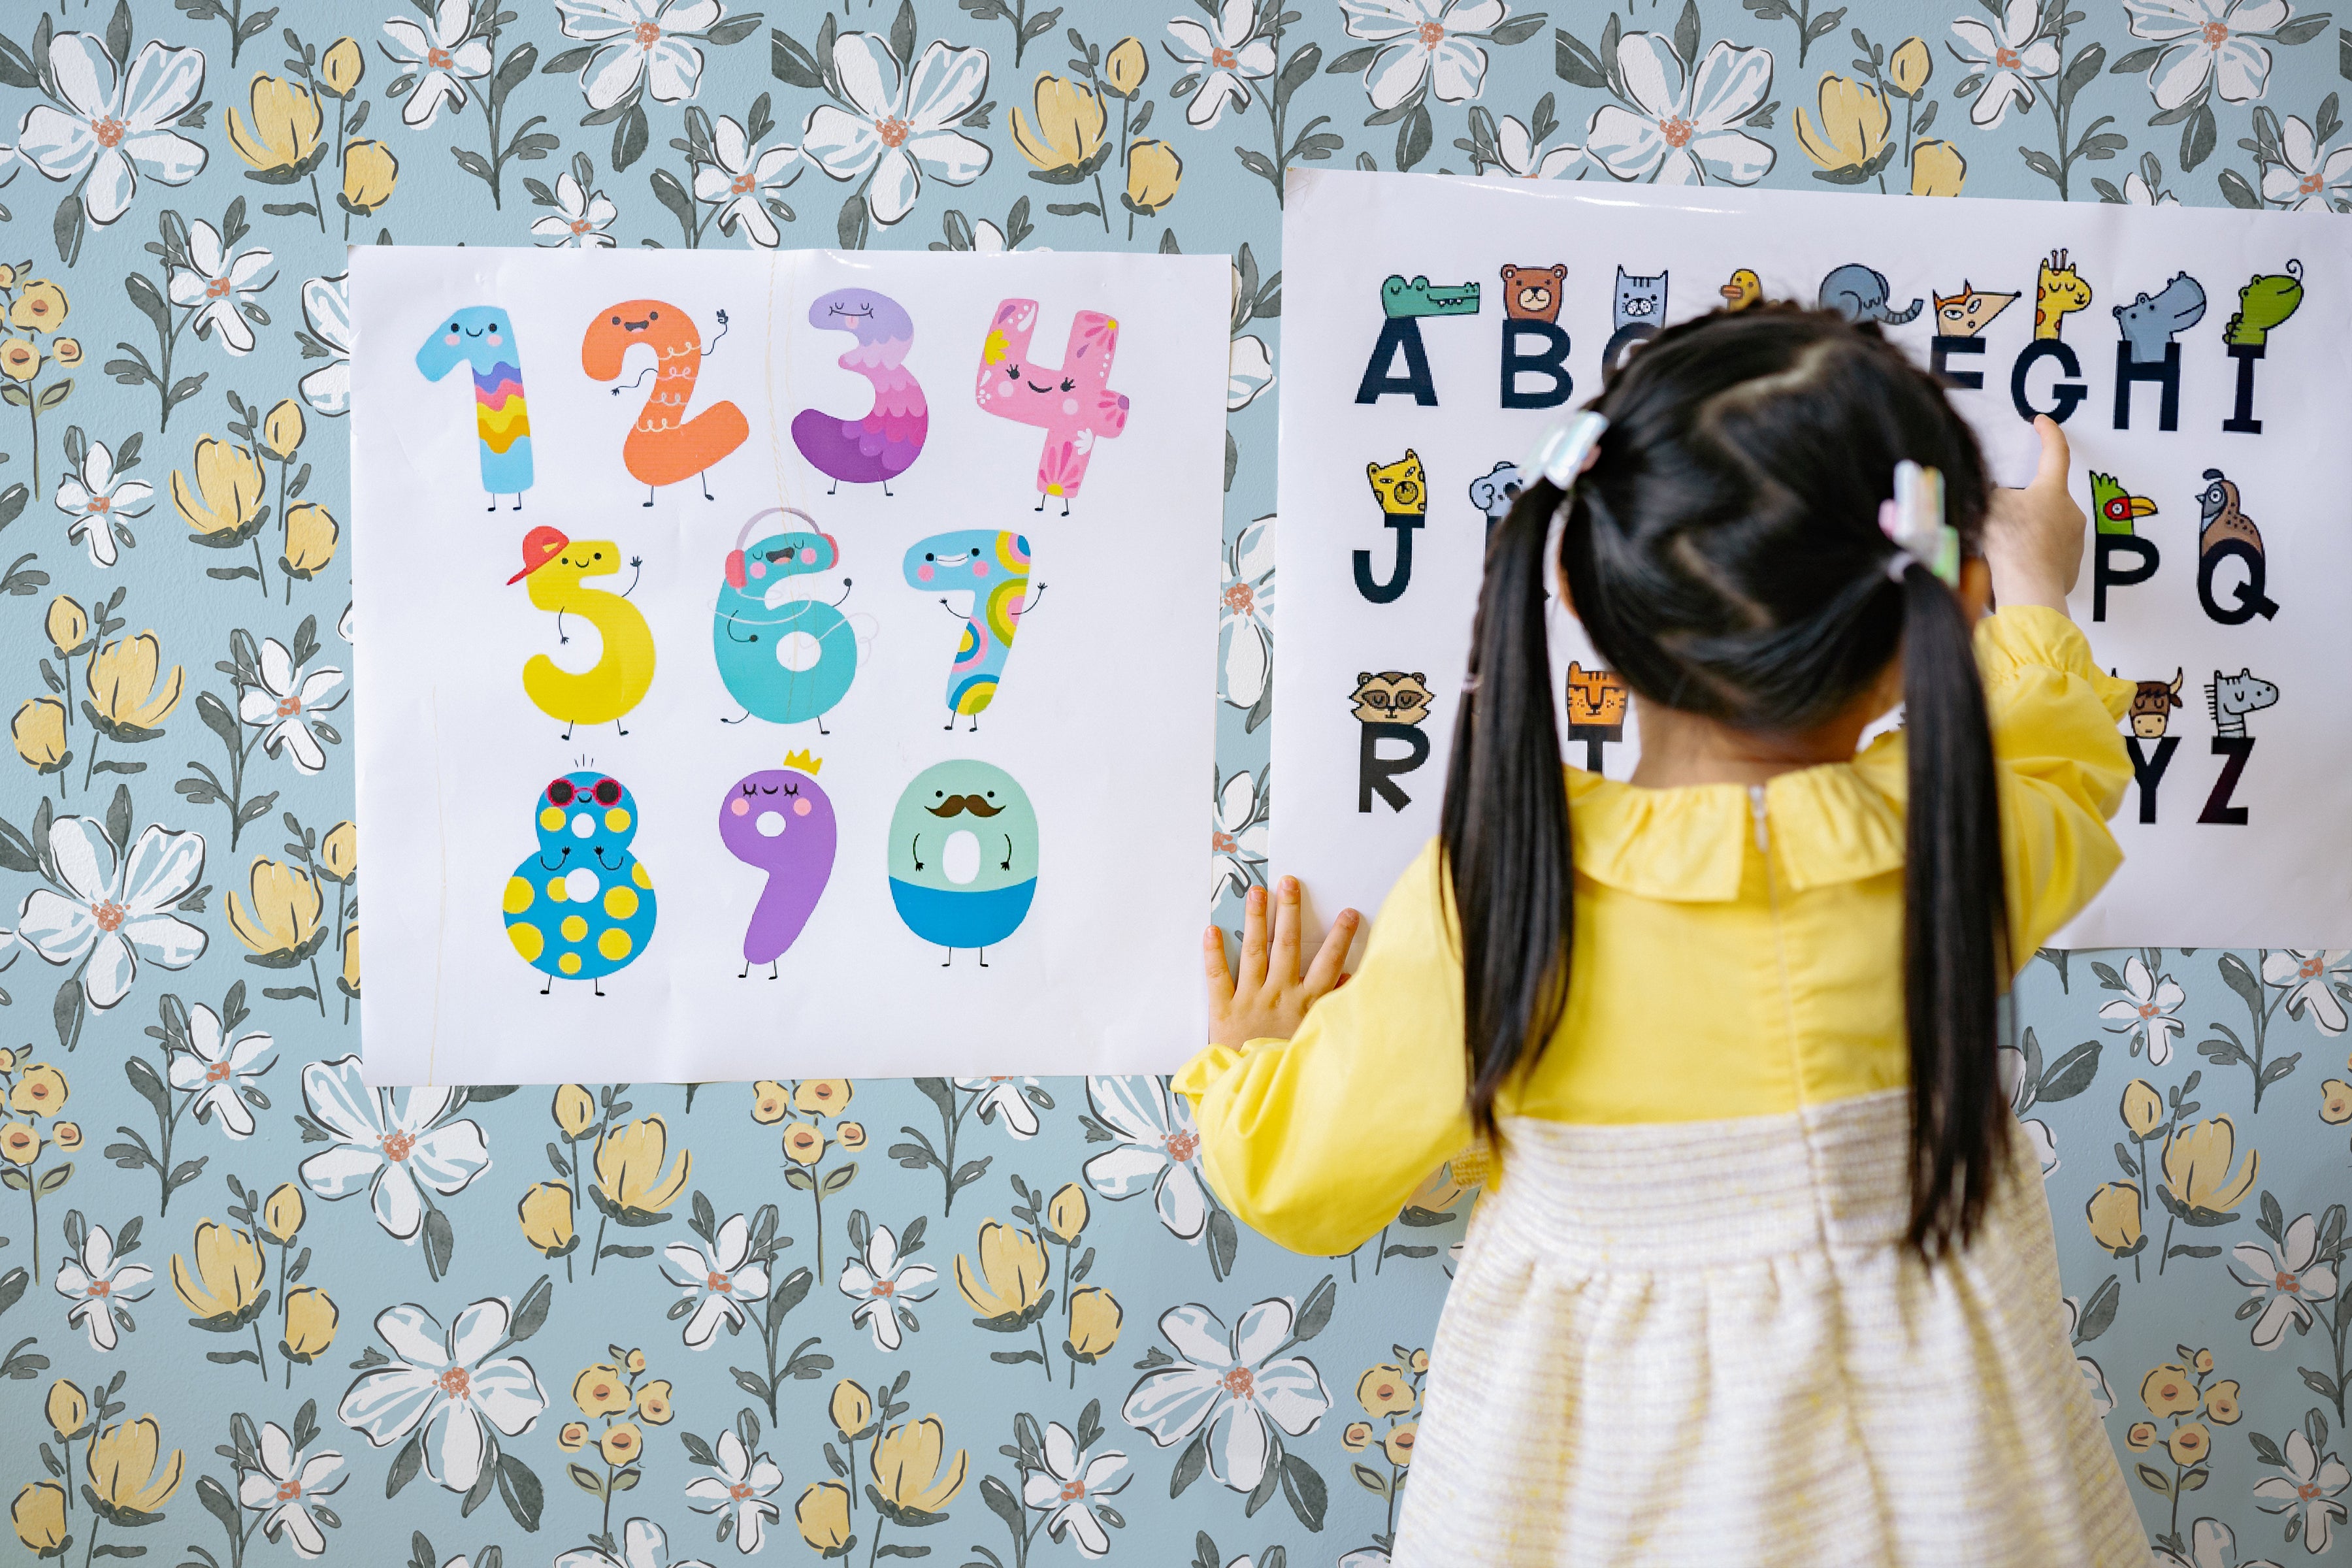 A young child in a yellow dress is interacting with an educational alphabet poster against a backdrop of the Sweet Nursery Wallpaper, enhancing the playful and educational atmosphere of the room.